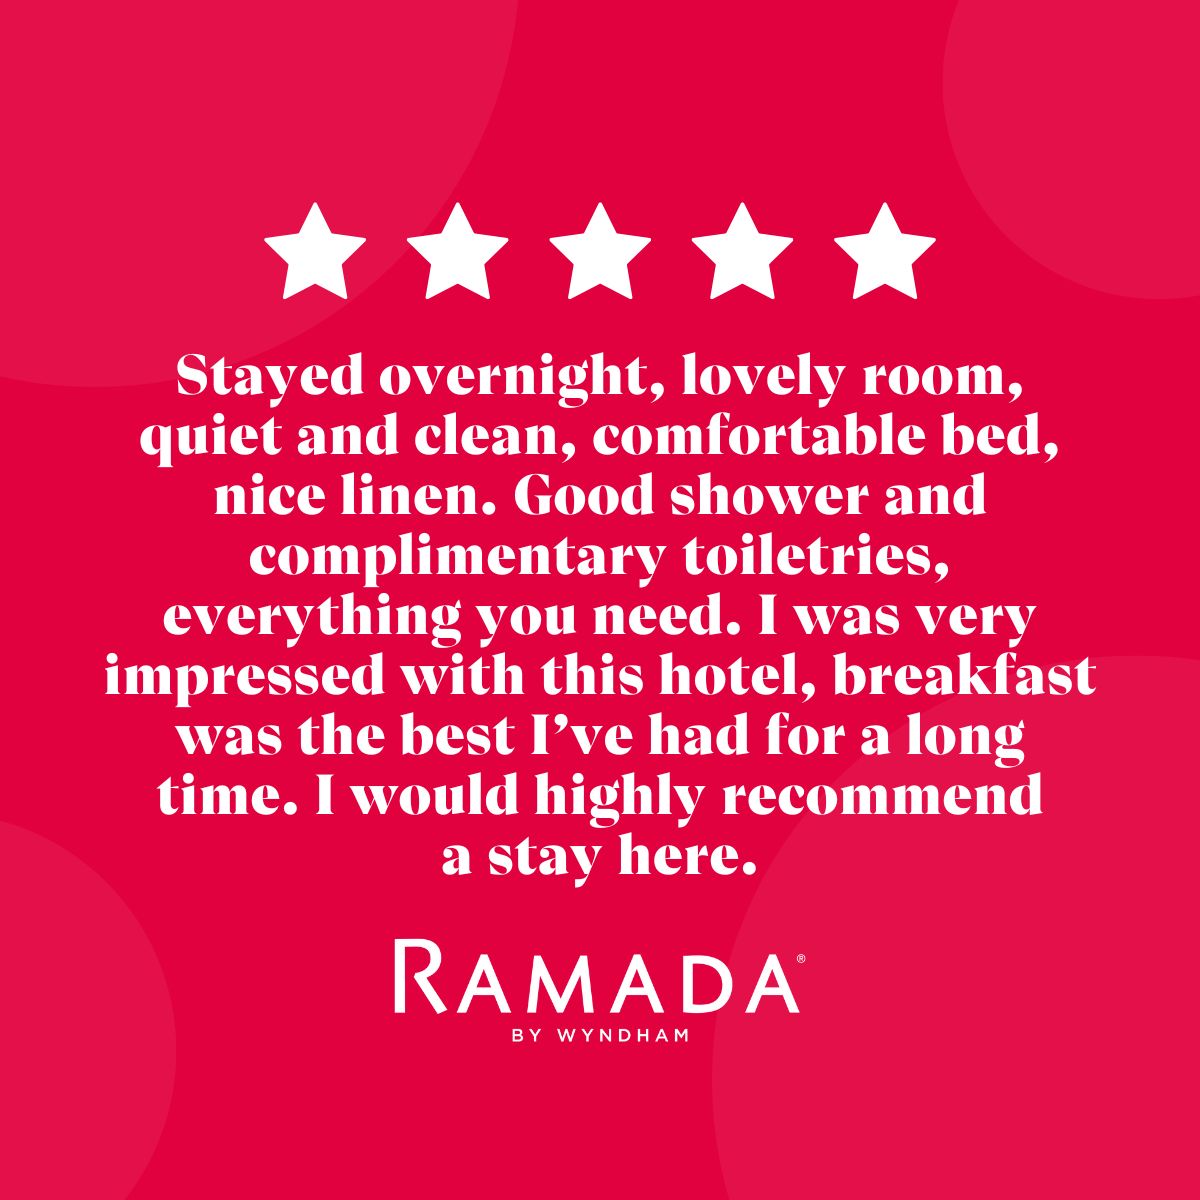 Our happy guests speak volumes about their memorable stay... Why not come and see for yourself why we're the top choice for travellers? Book your stay today! 👇🏻 ramadacoventry.co.uk/rooms